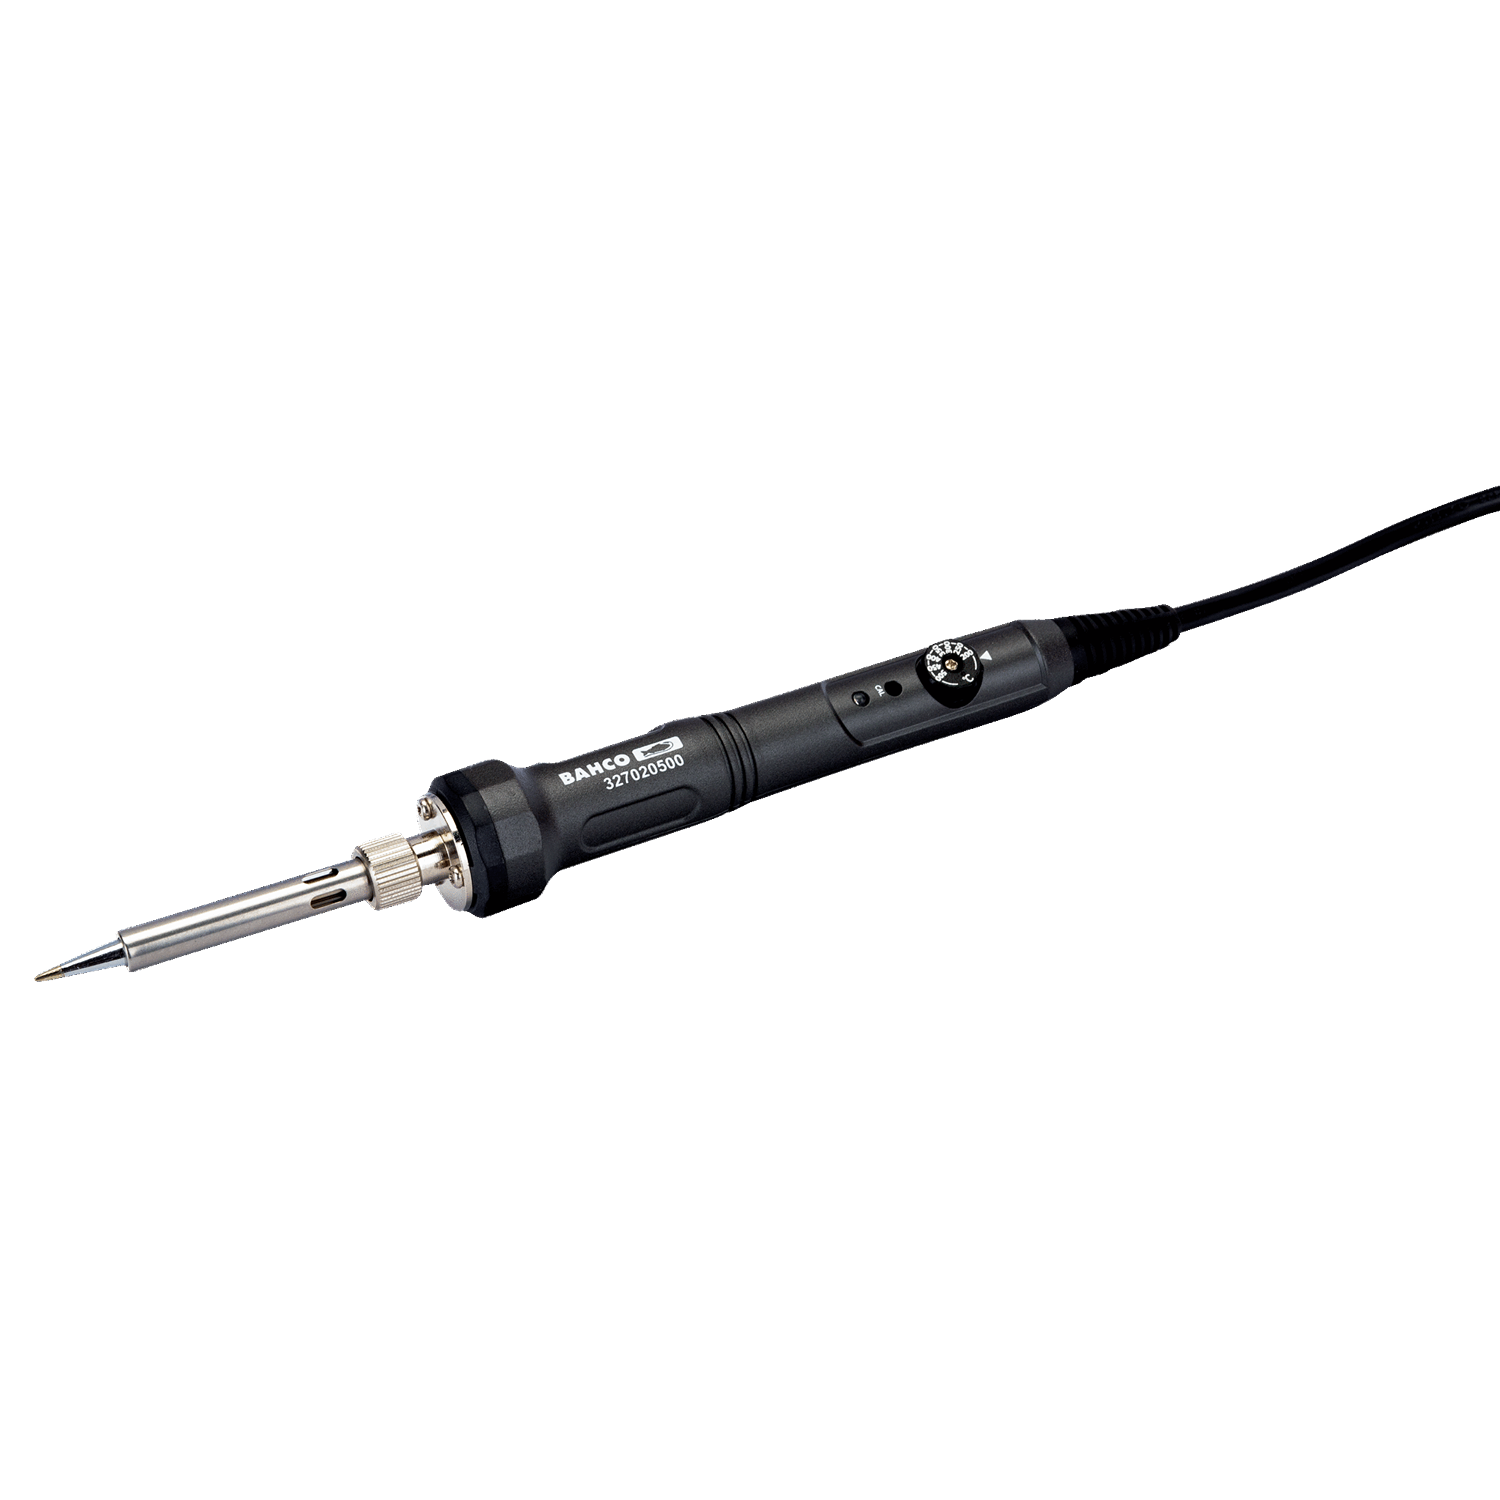 BAHCO 3270 Temperature Controlled Soldering Tools Irons - 50 W - Premium Soldering Tools from BAHCO - Shop now at Yew Aik.